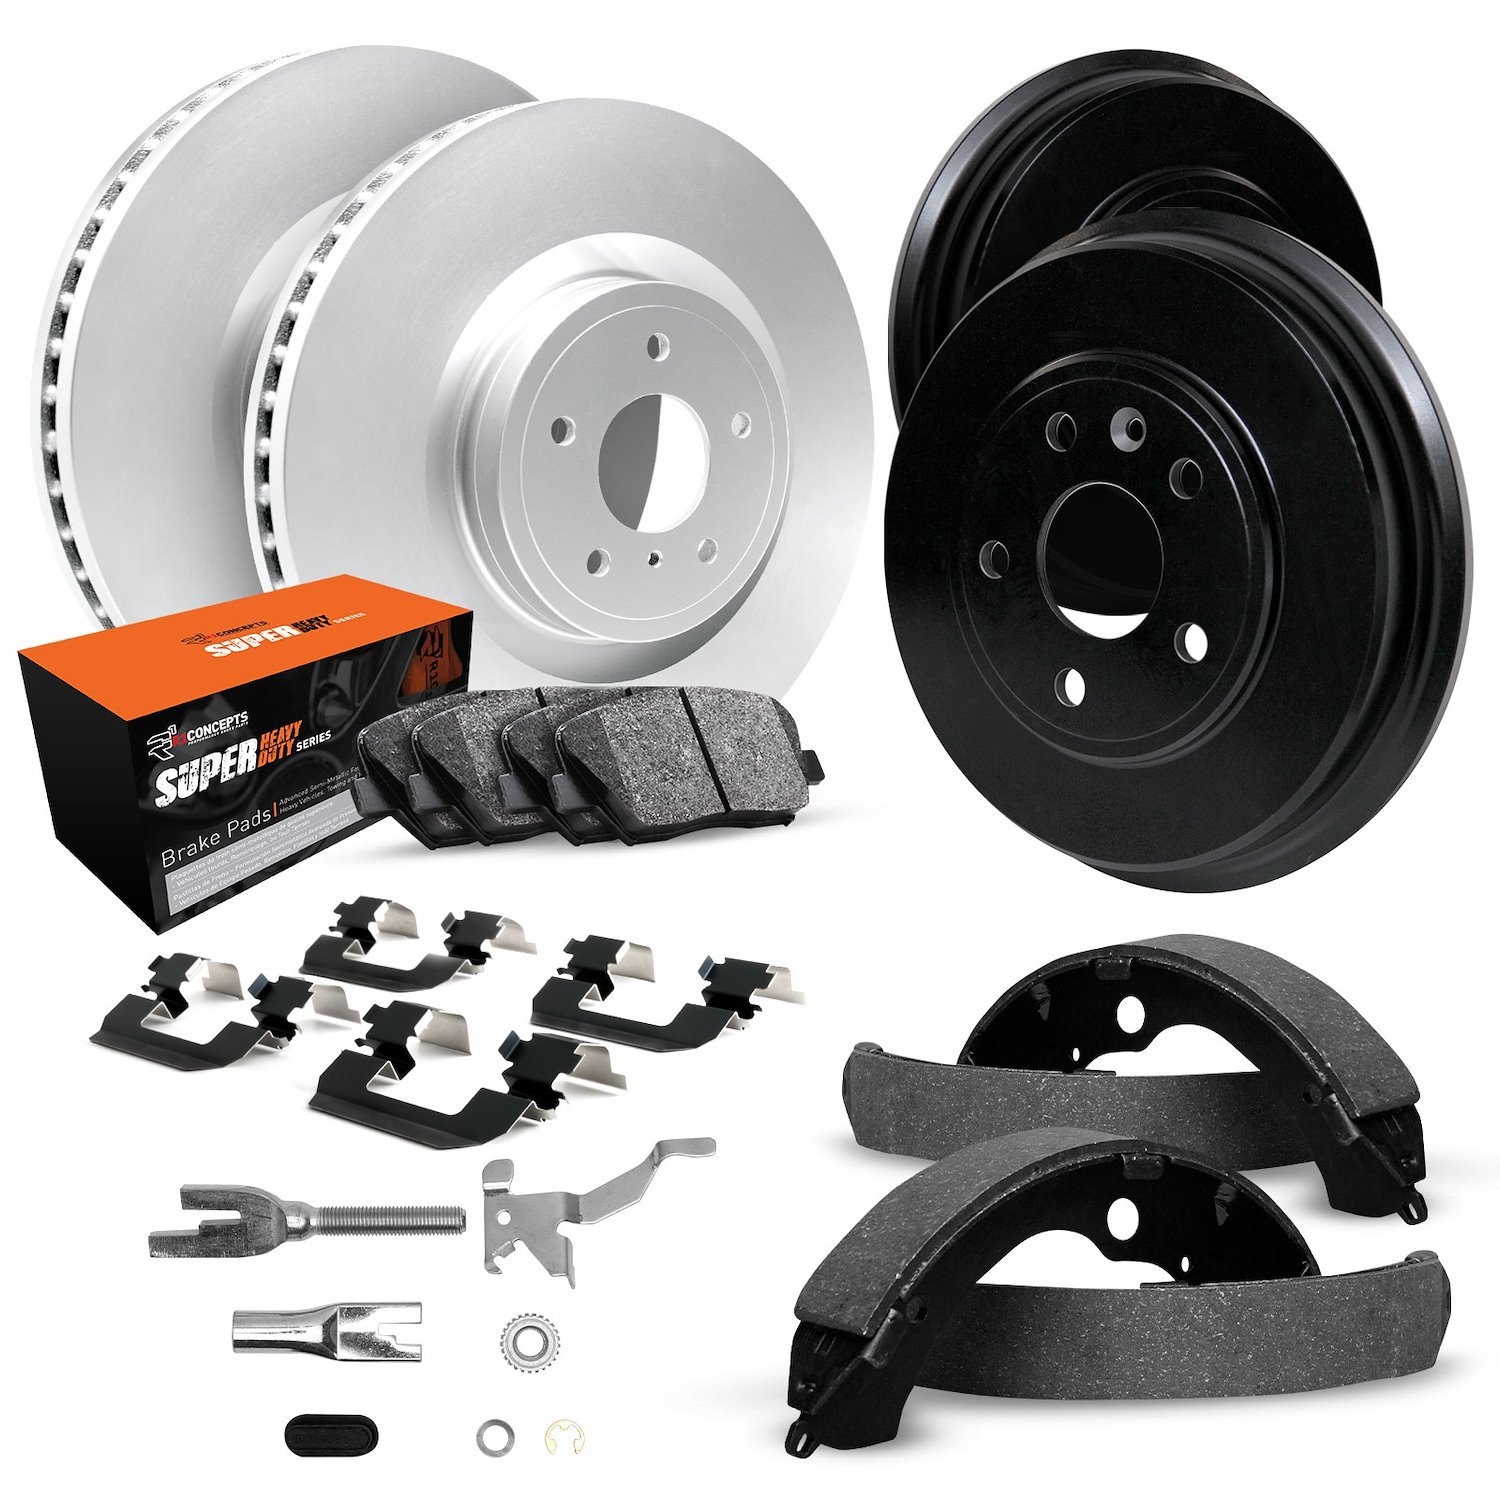 GEO-Carbon Brake Rotor & Drum Set w/Super-Duty Pads, Shoes, Hardware/Adjusters, 2007-2007 GM, Position: Front & Rear